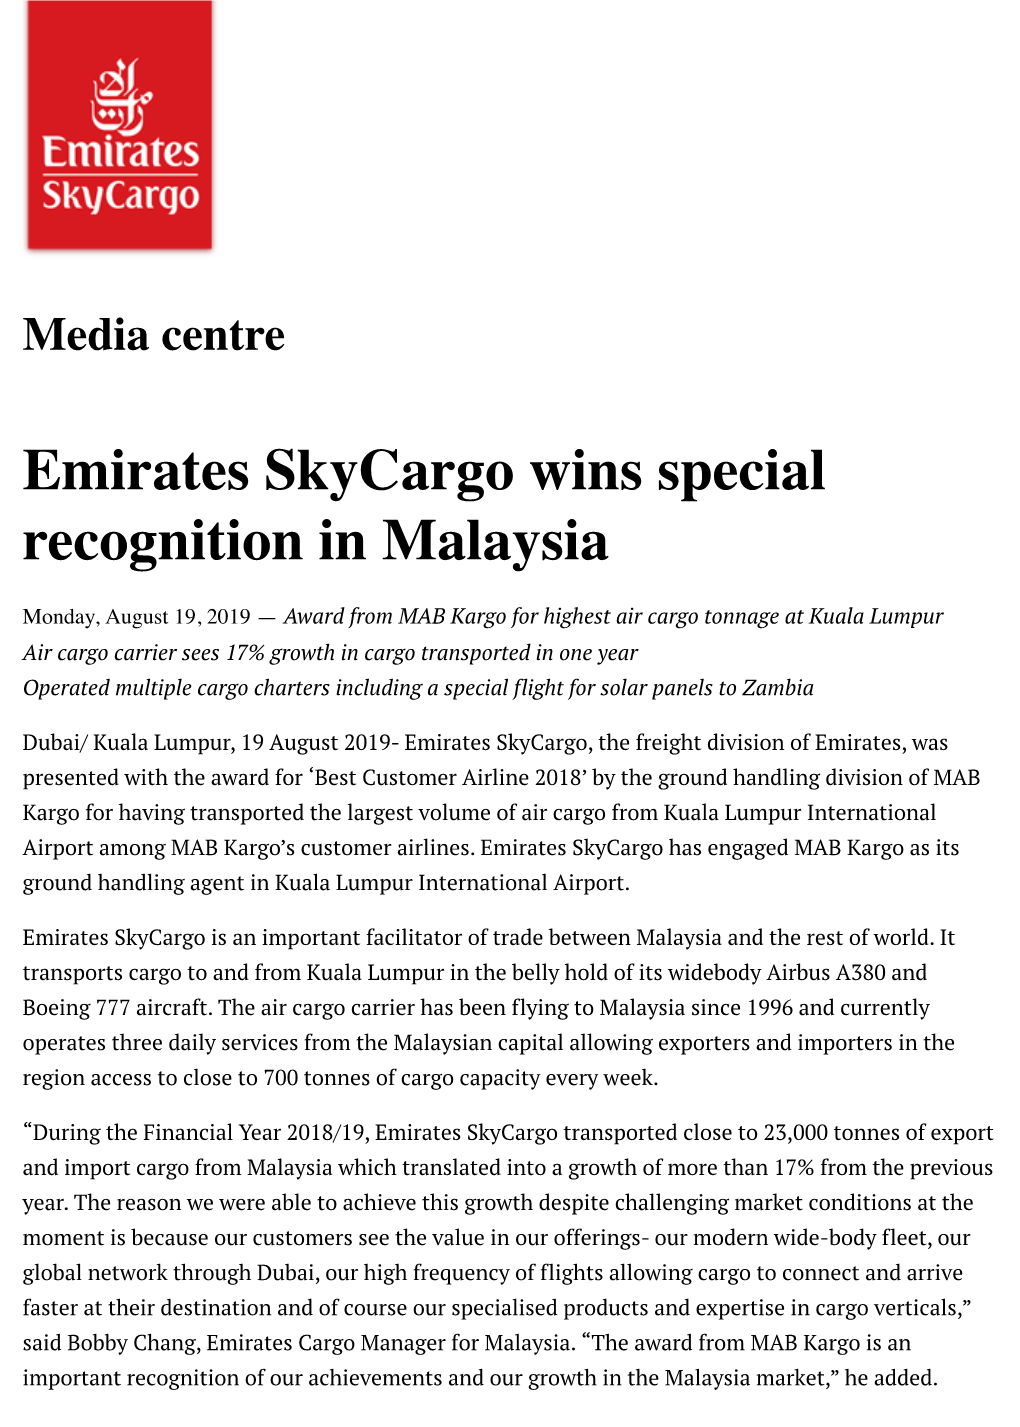 Emirates Skycargo Wins Special Recognition in Malaysia